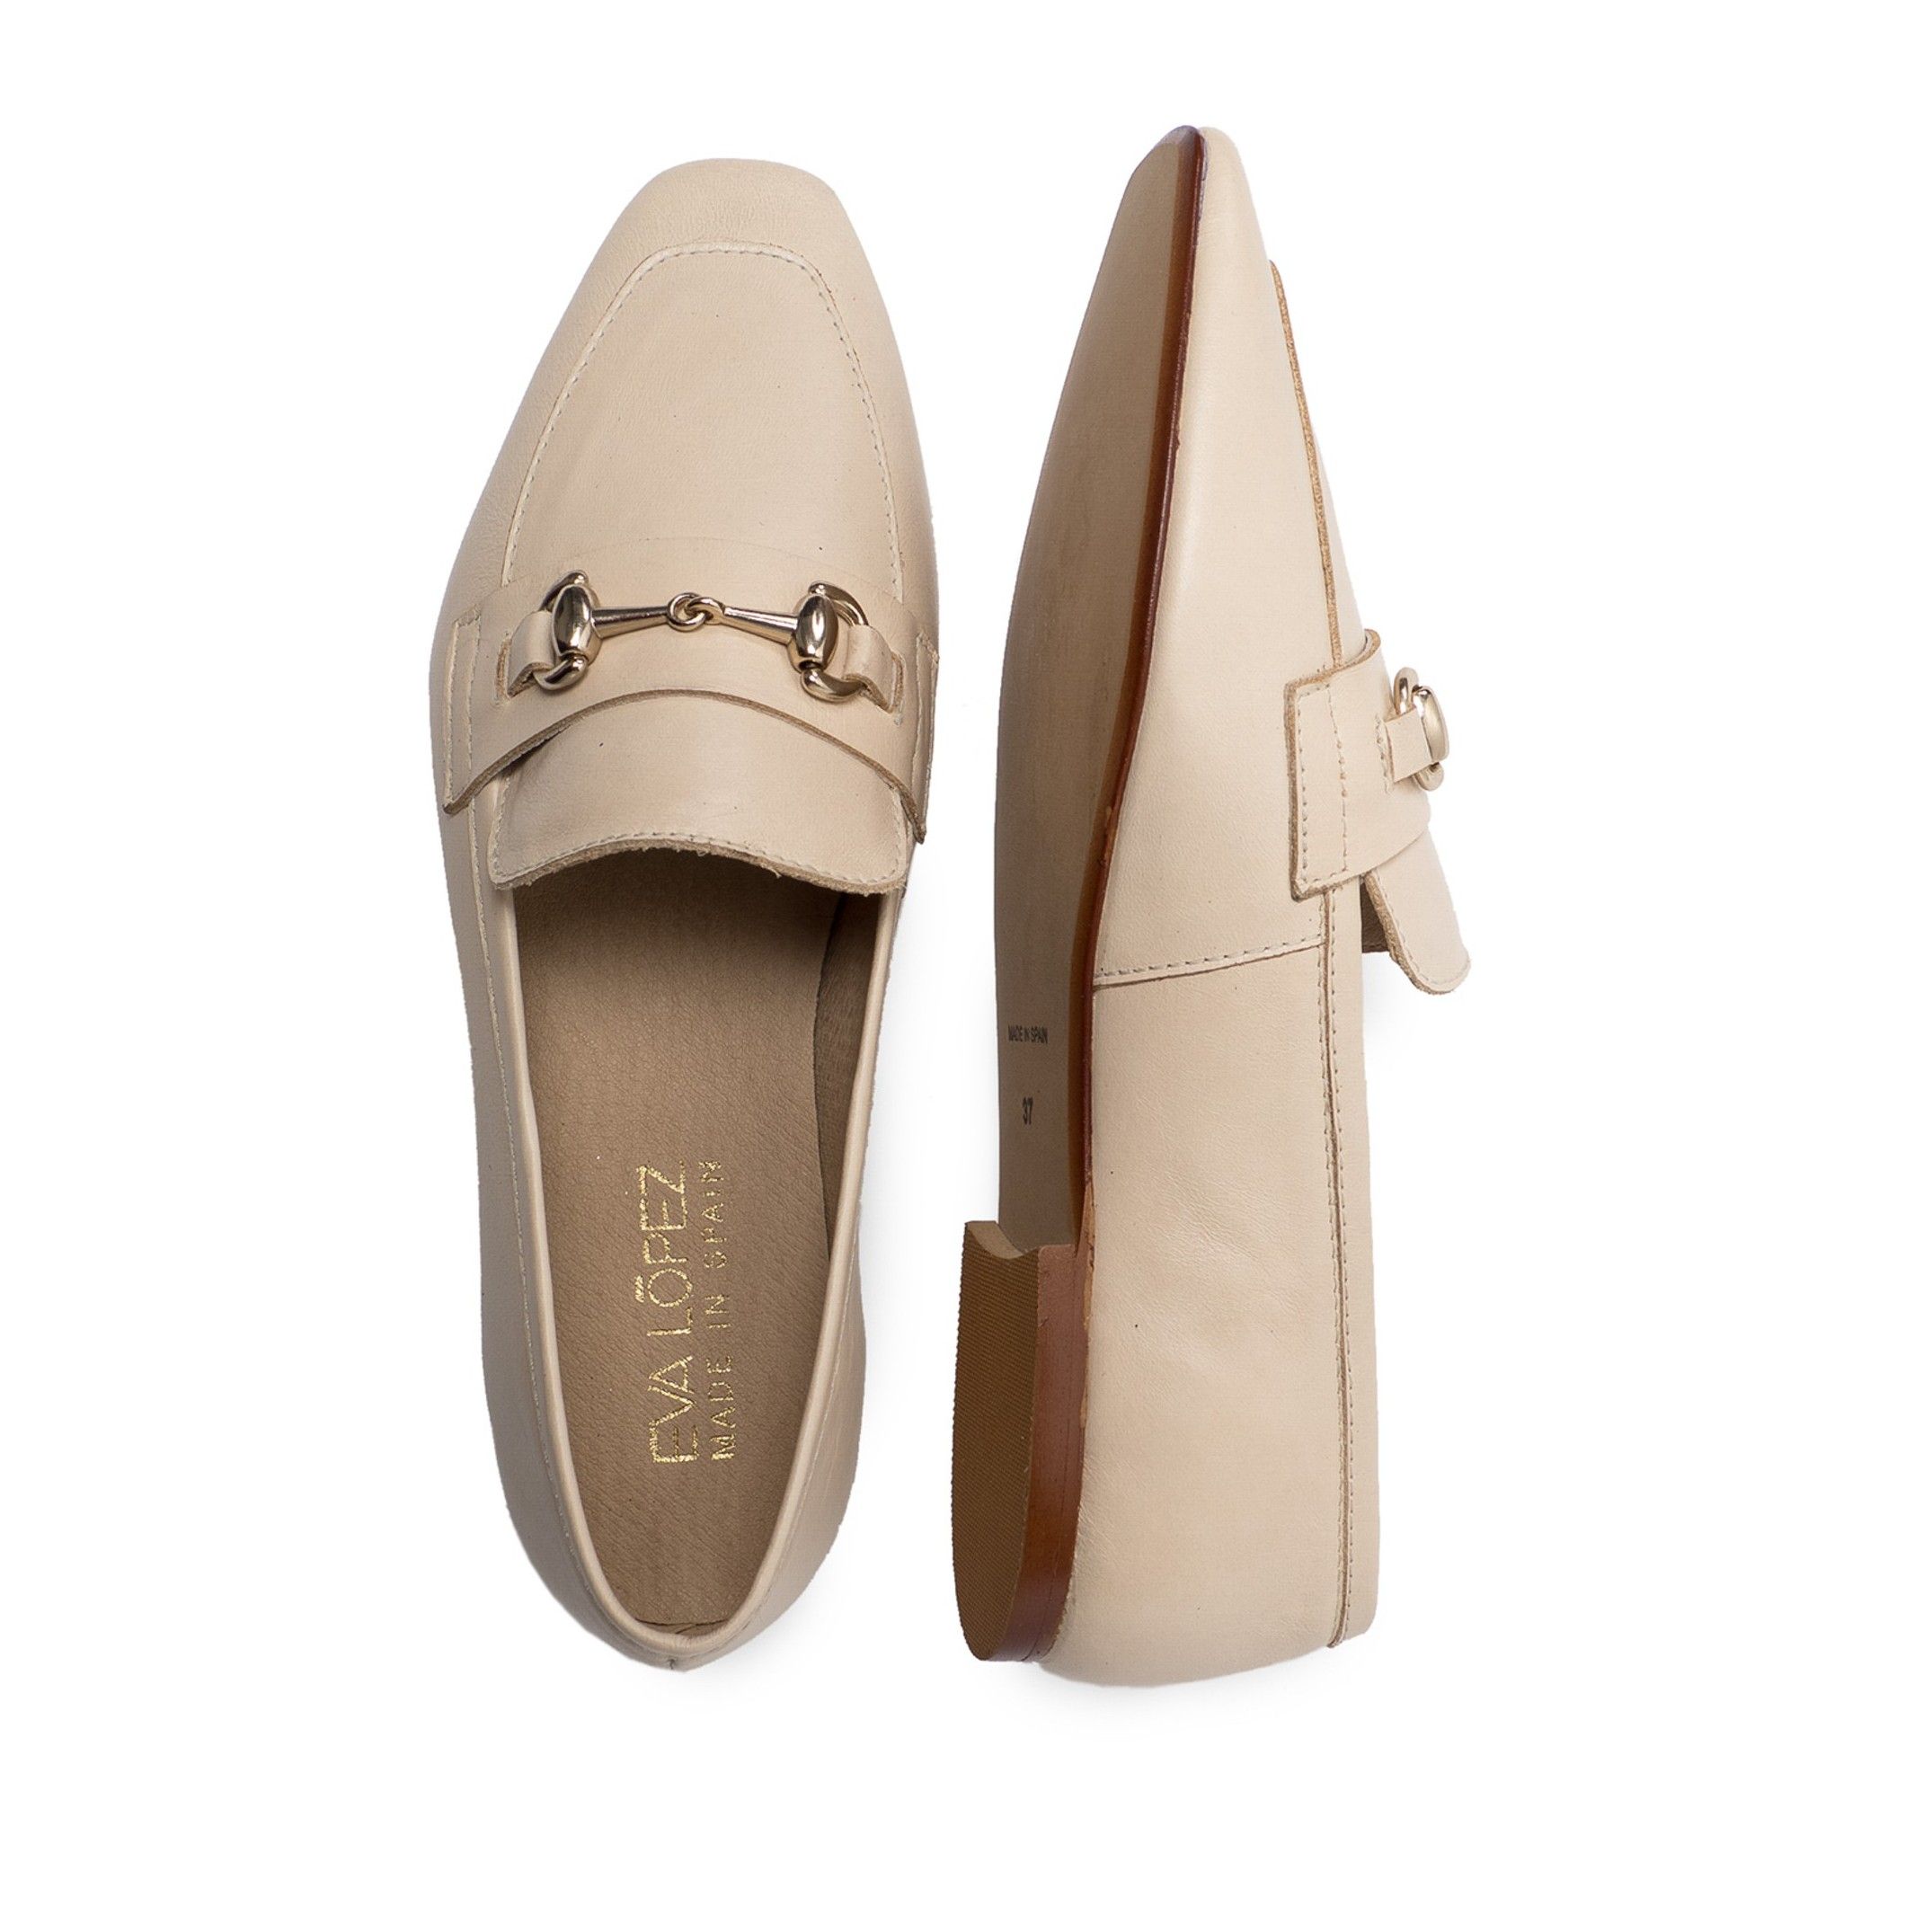 Flat moccasins for women, by Eva López Shoes. Exterior material: leatherette. Open shoe. Inner lining and insole: Breathable, anti-allergic microfiber and keeps the inside of the footwear dry. Sole material: Cuerolite. Heel height 1 cm. Designed and manufactured in Spain.